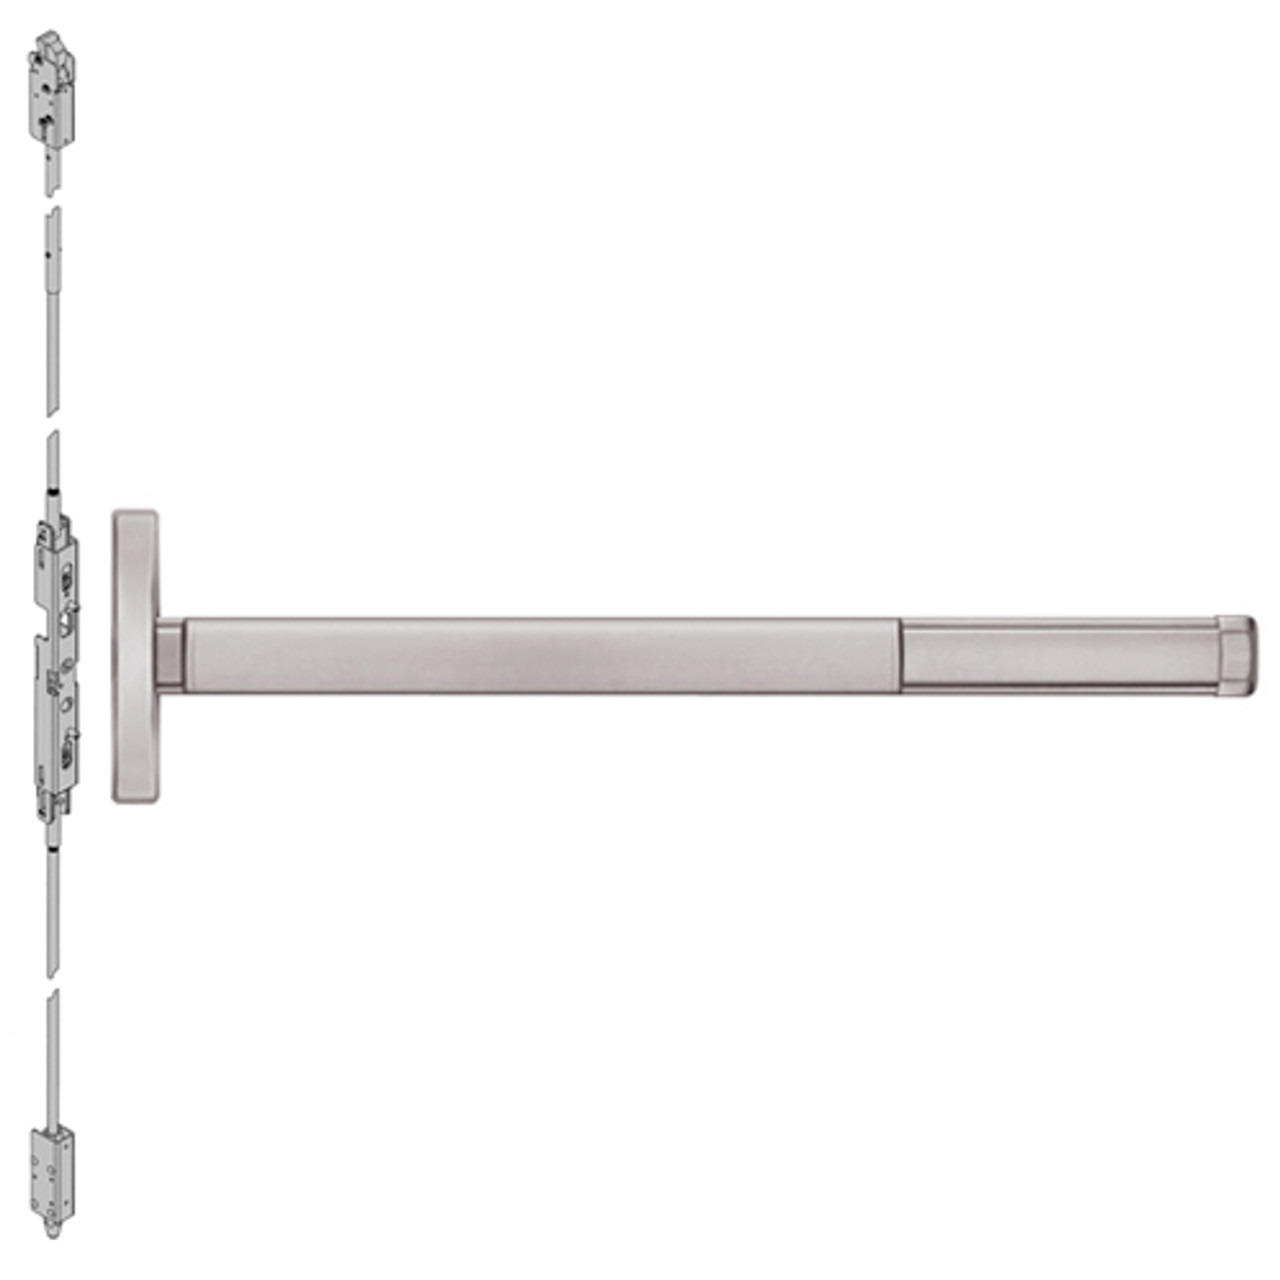 DE2603-628-48 PHI 2600 Series Concealed Vertical Rod Exit Device with Delayed Egress Prepped for Key Retracts Latchbolt in Satin Aluminum Finish